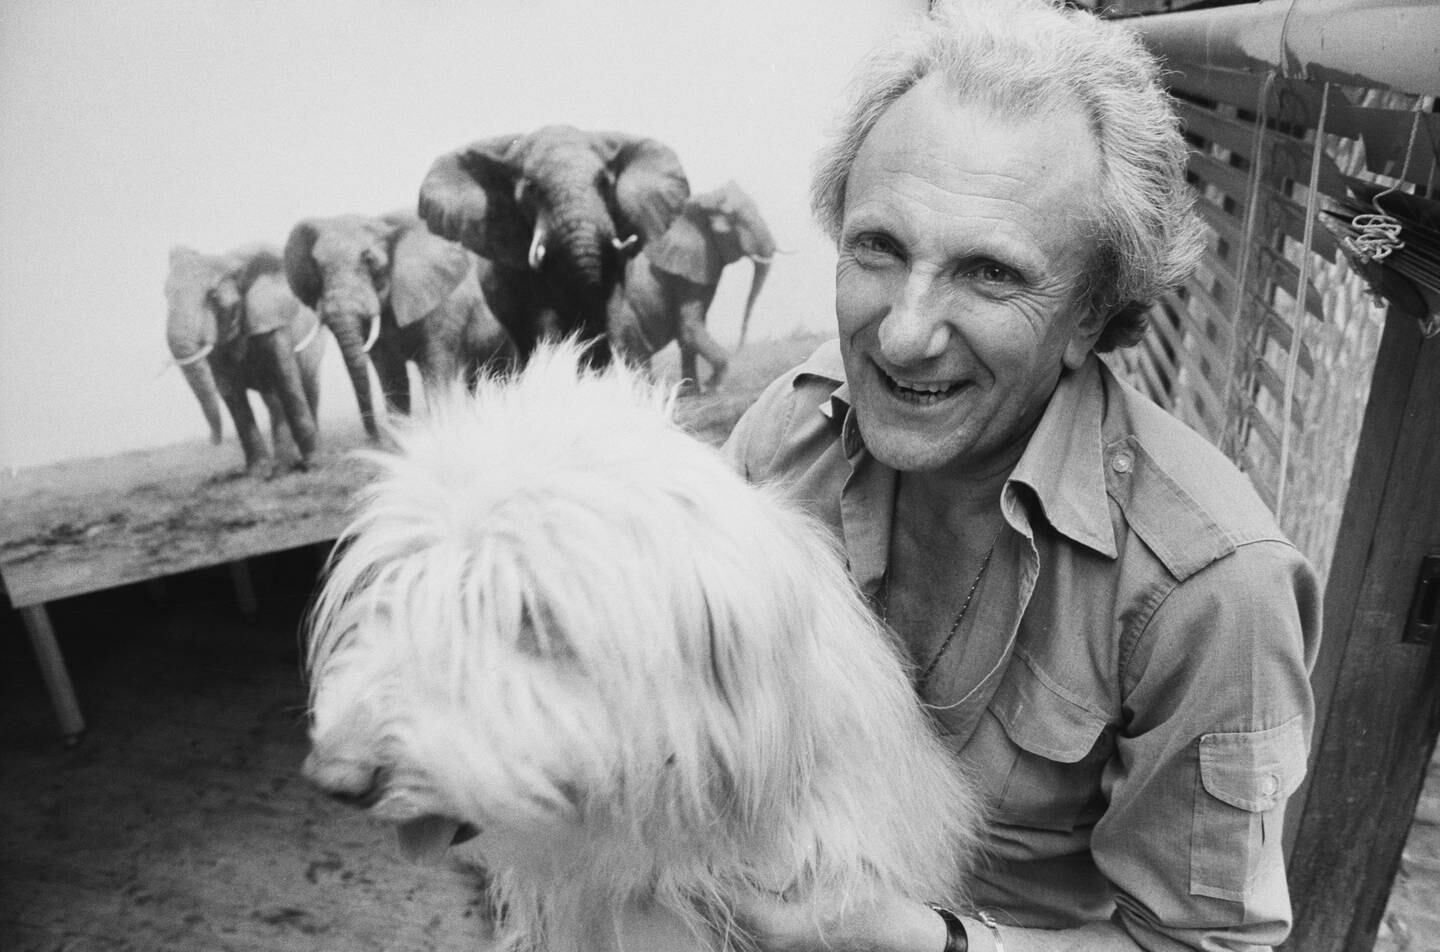 David Shepherd, above in 1985, was best known for his paintings of African wildlife but was also a gifted portrait artist. Getty Images